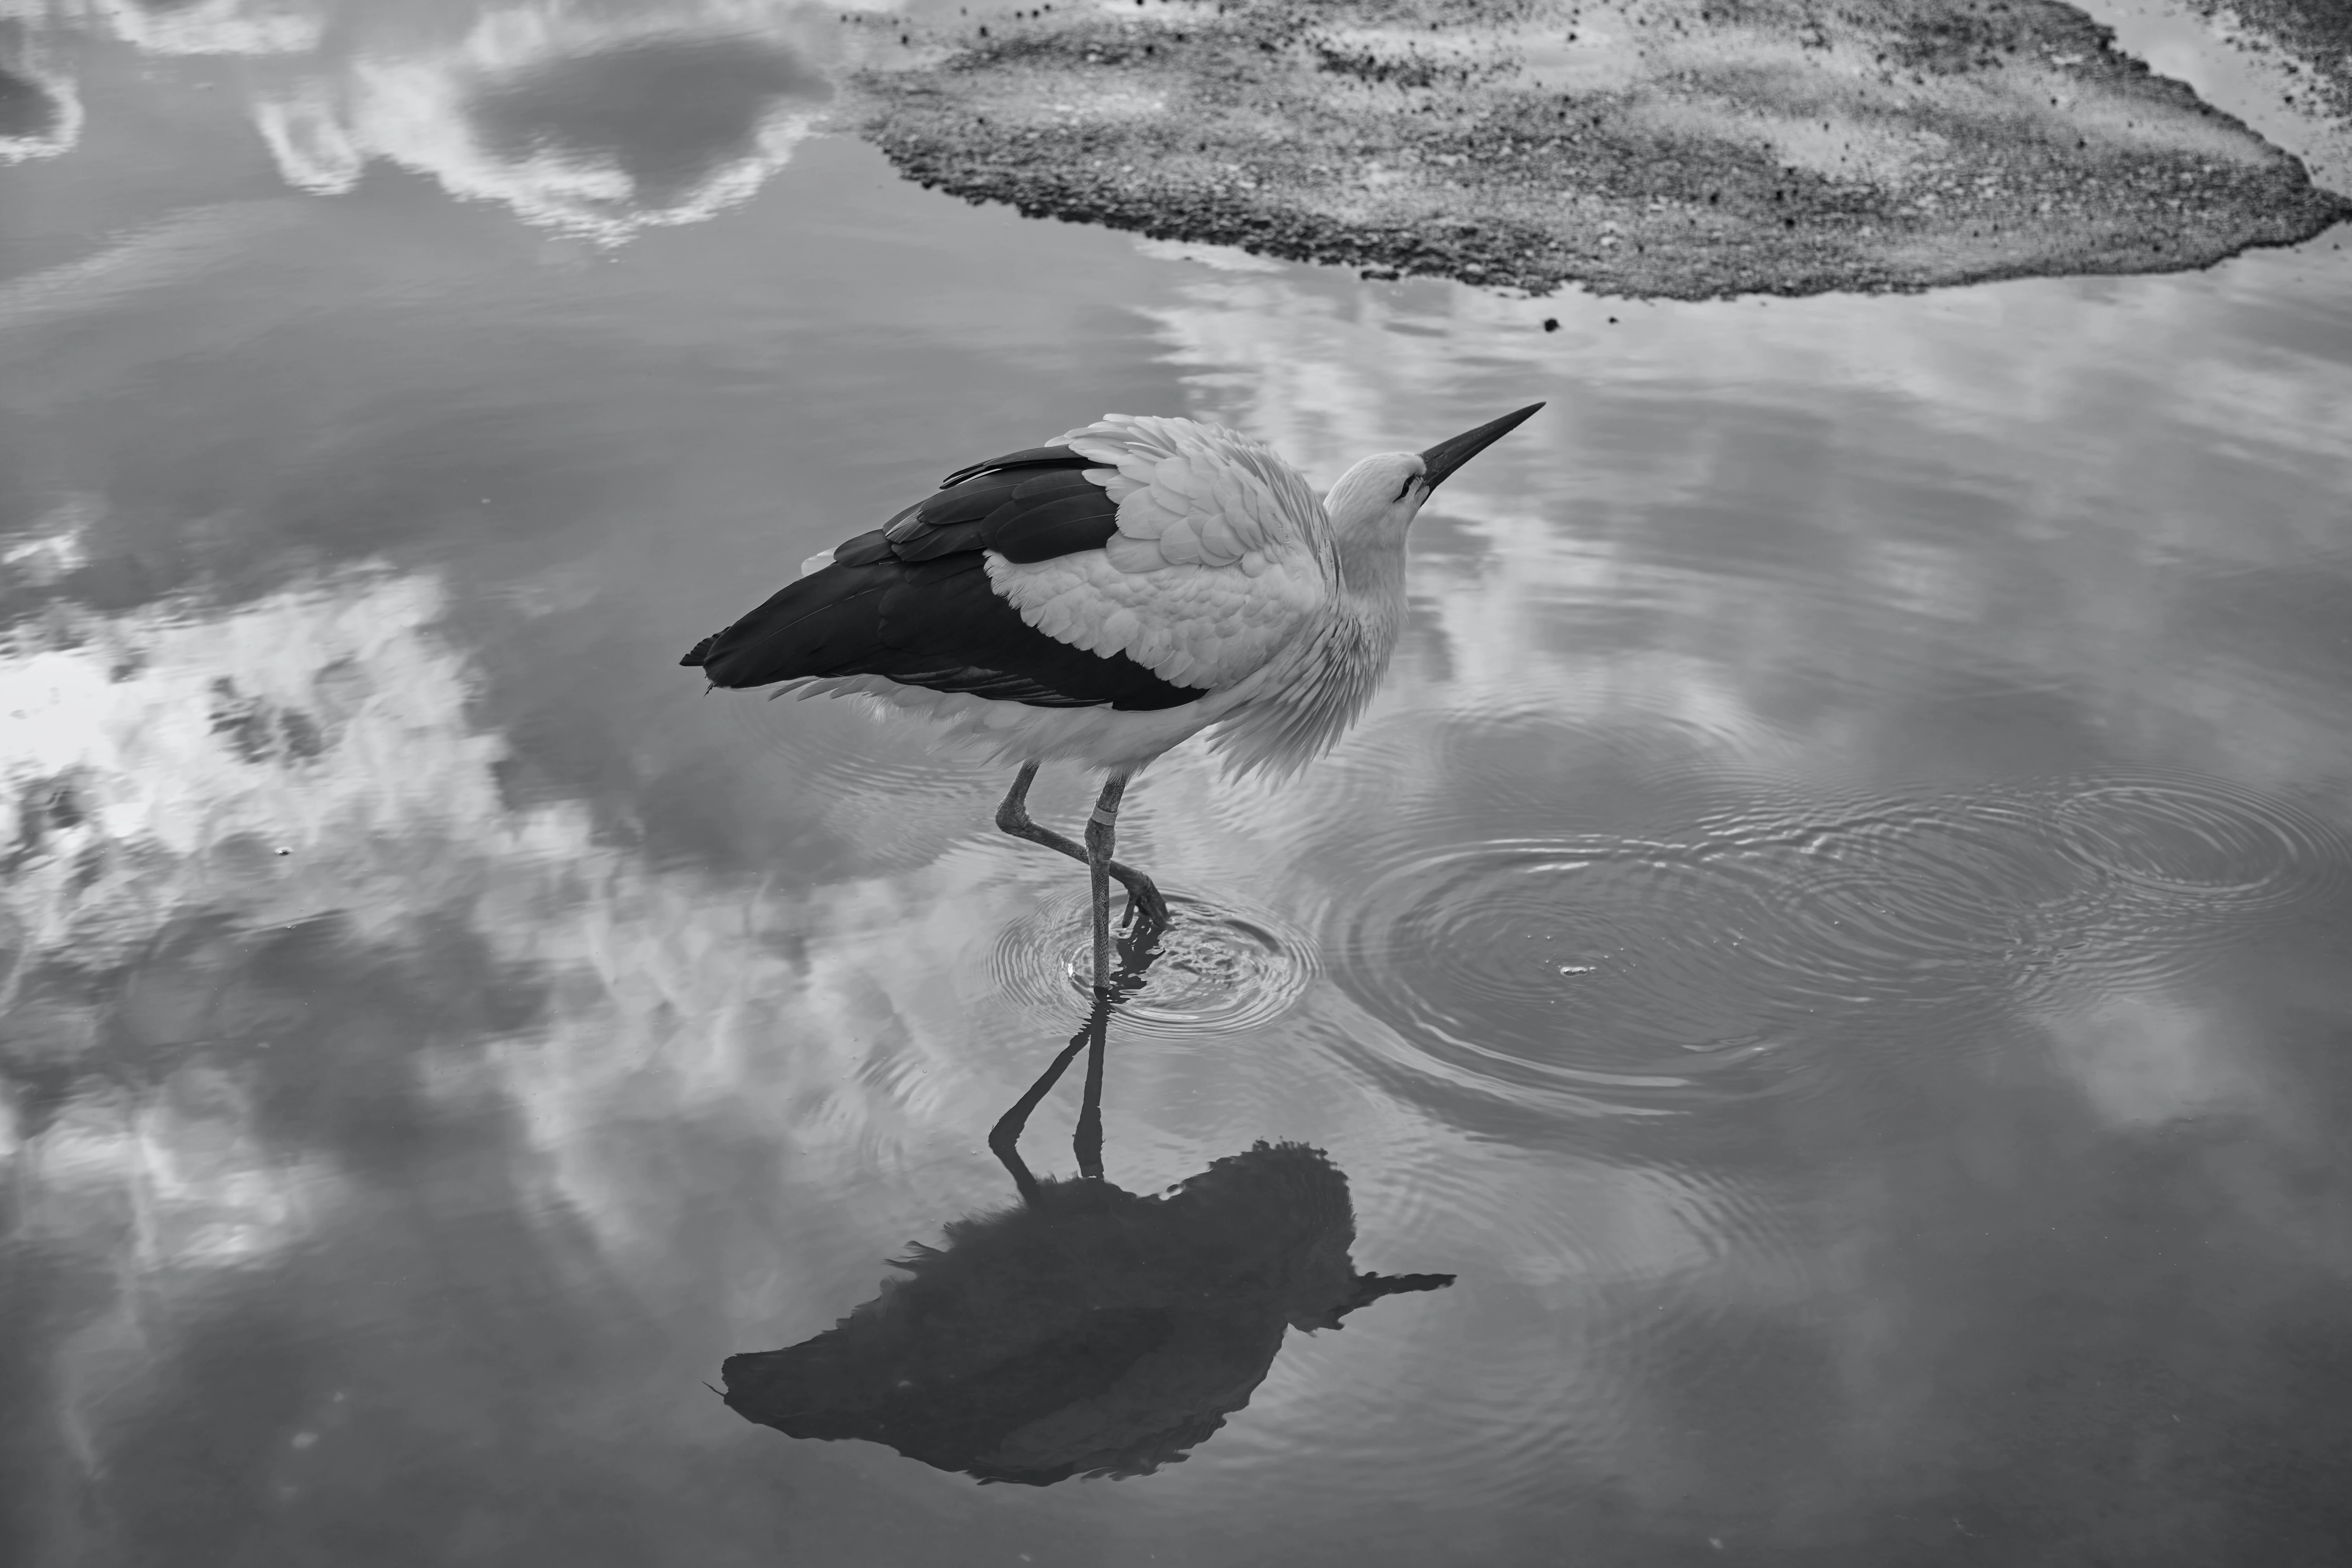 Bird and sky reflection on water